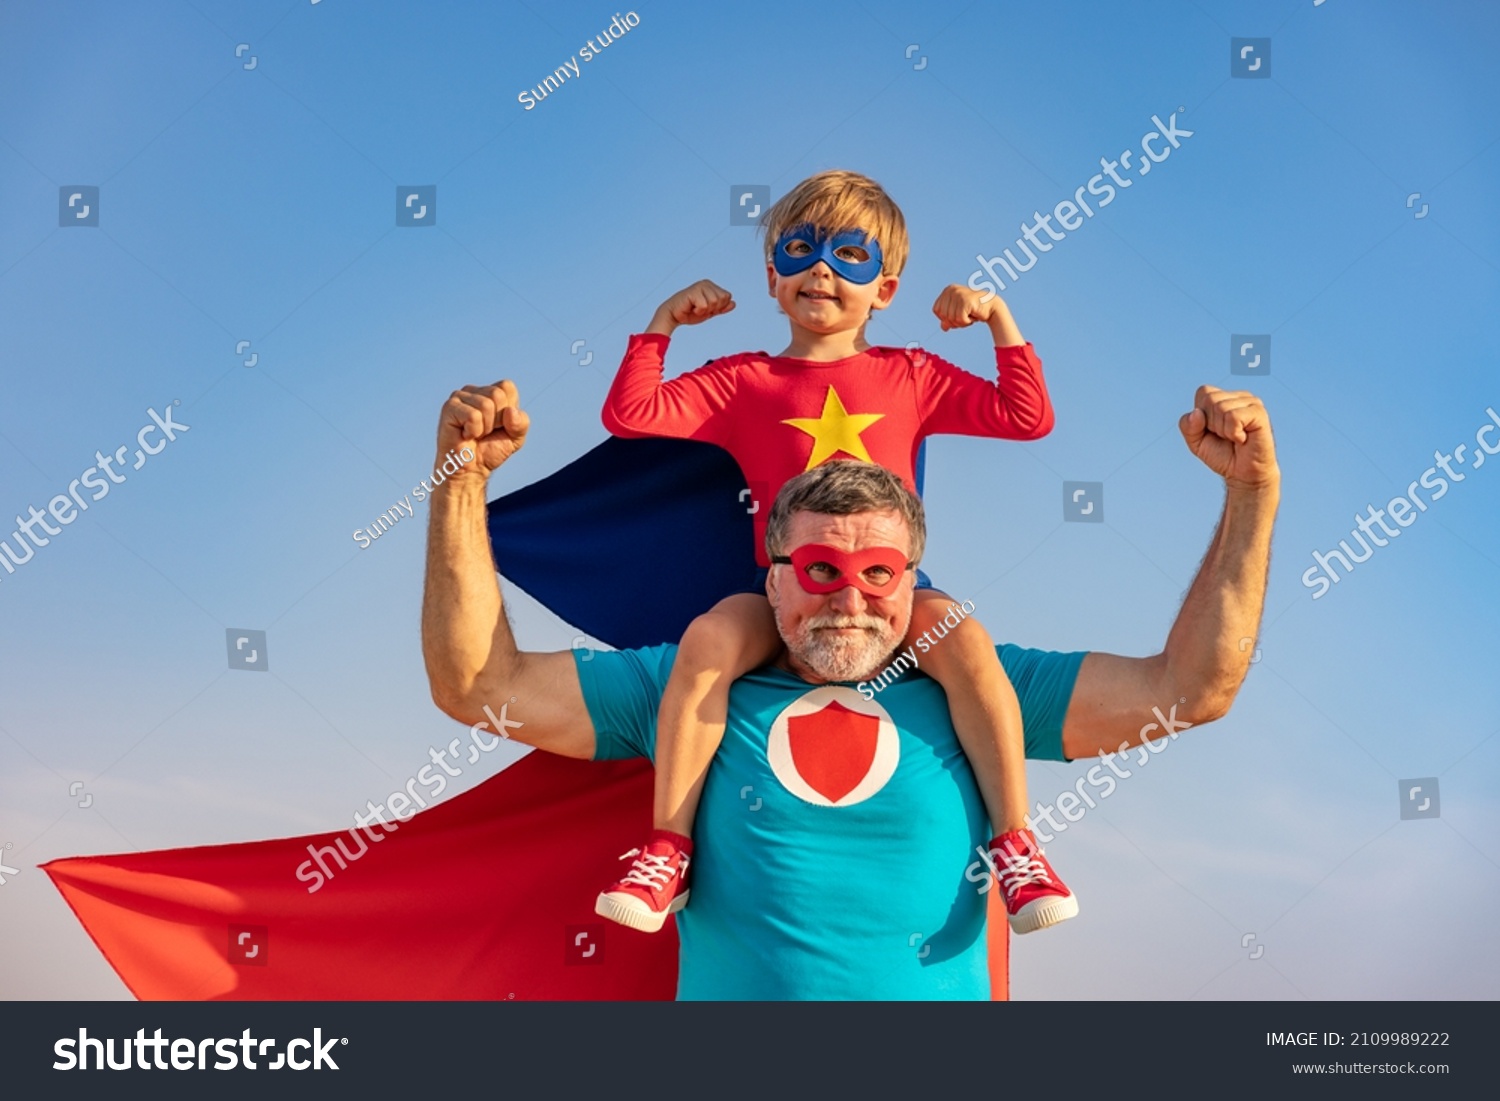 Superhero senior man and child playing outdoor. Super hero grandfather and boy having fun together against blue summer sky background. Family holiday concept. Happy Father's day #2109989222